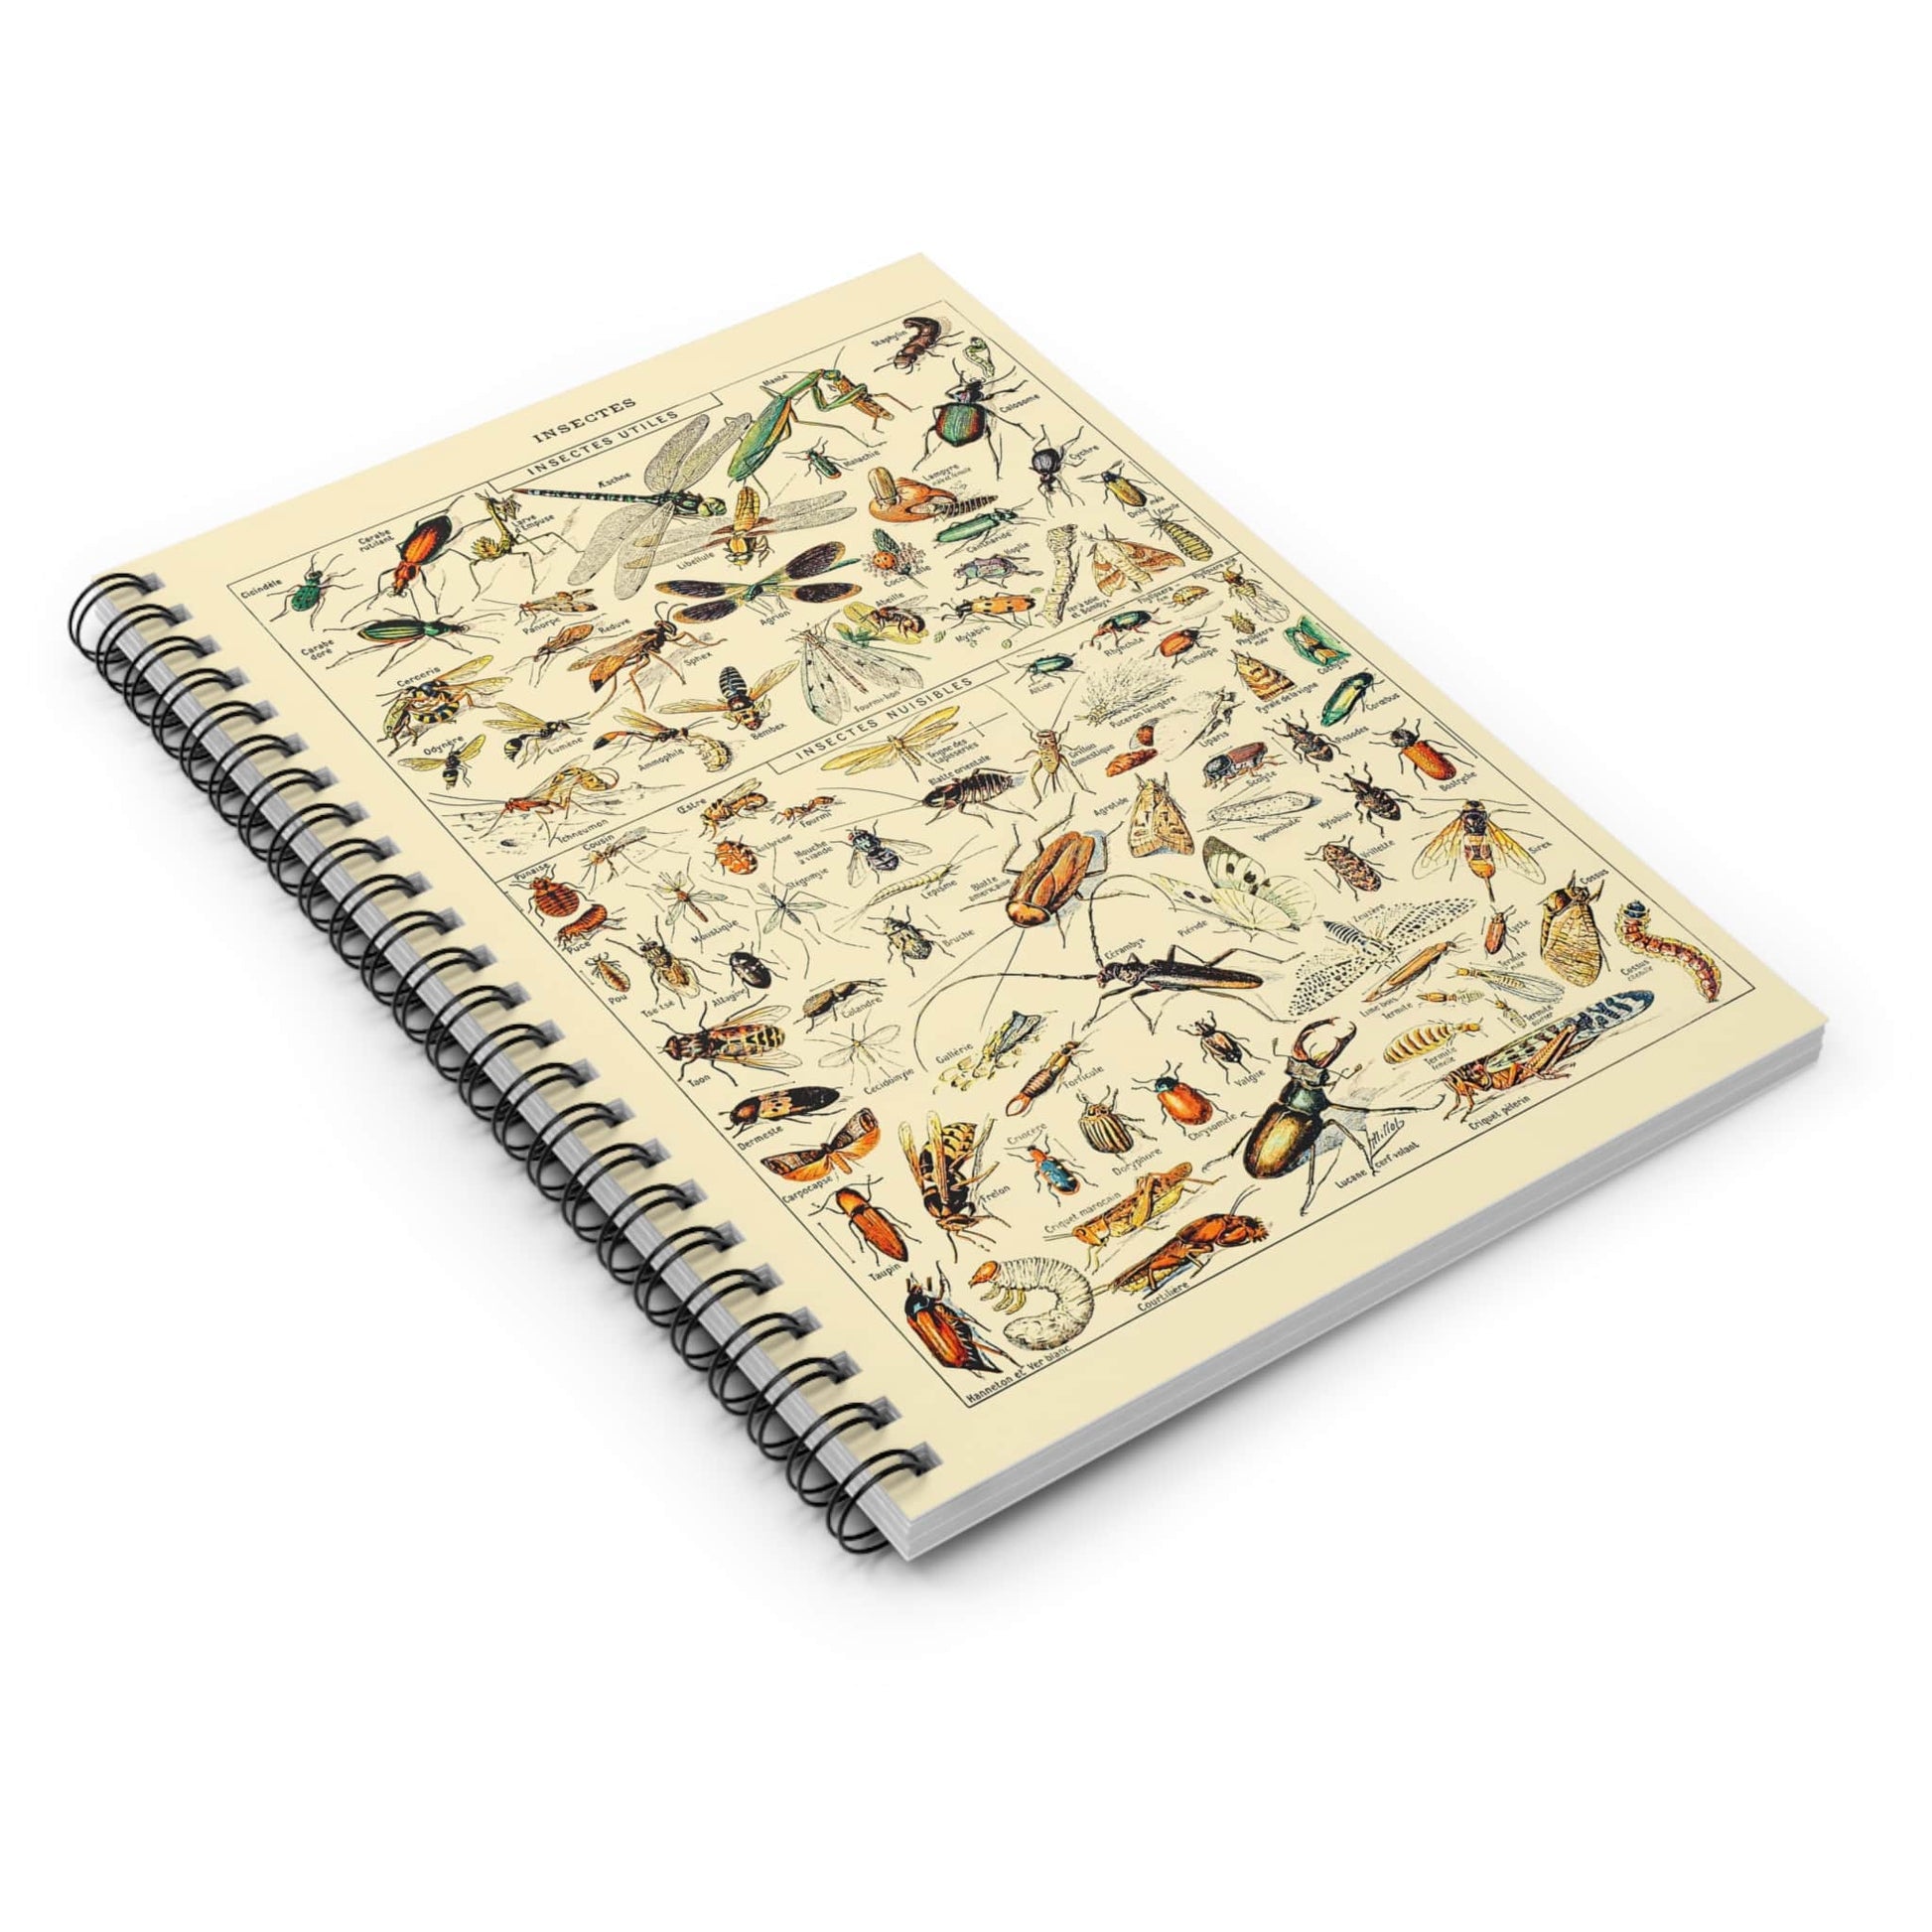 Bugs and Insects Spiral Notebook Laying Flat on White Surface